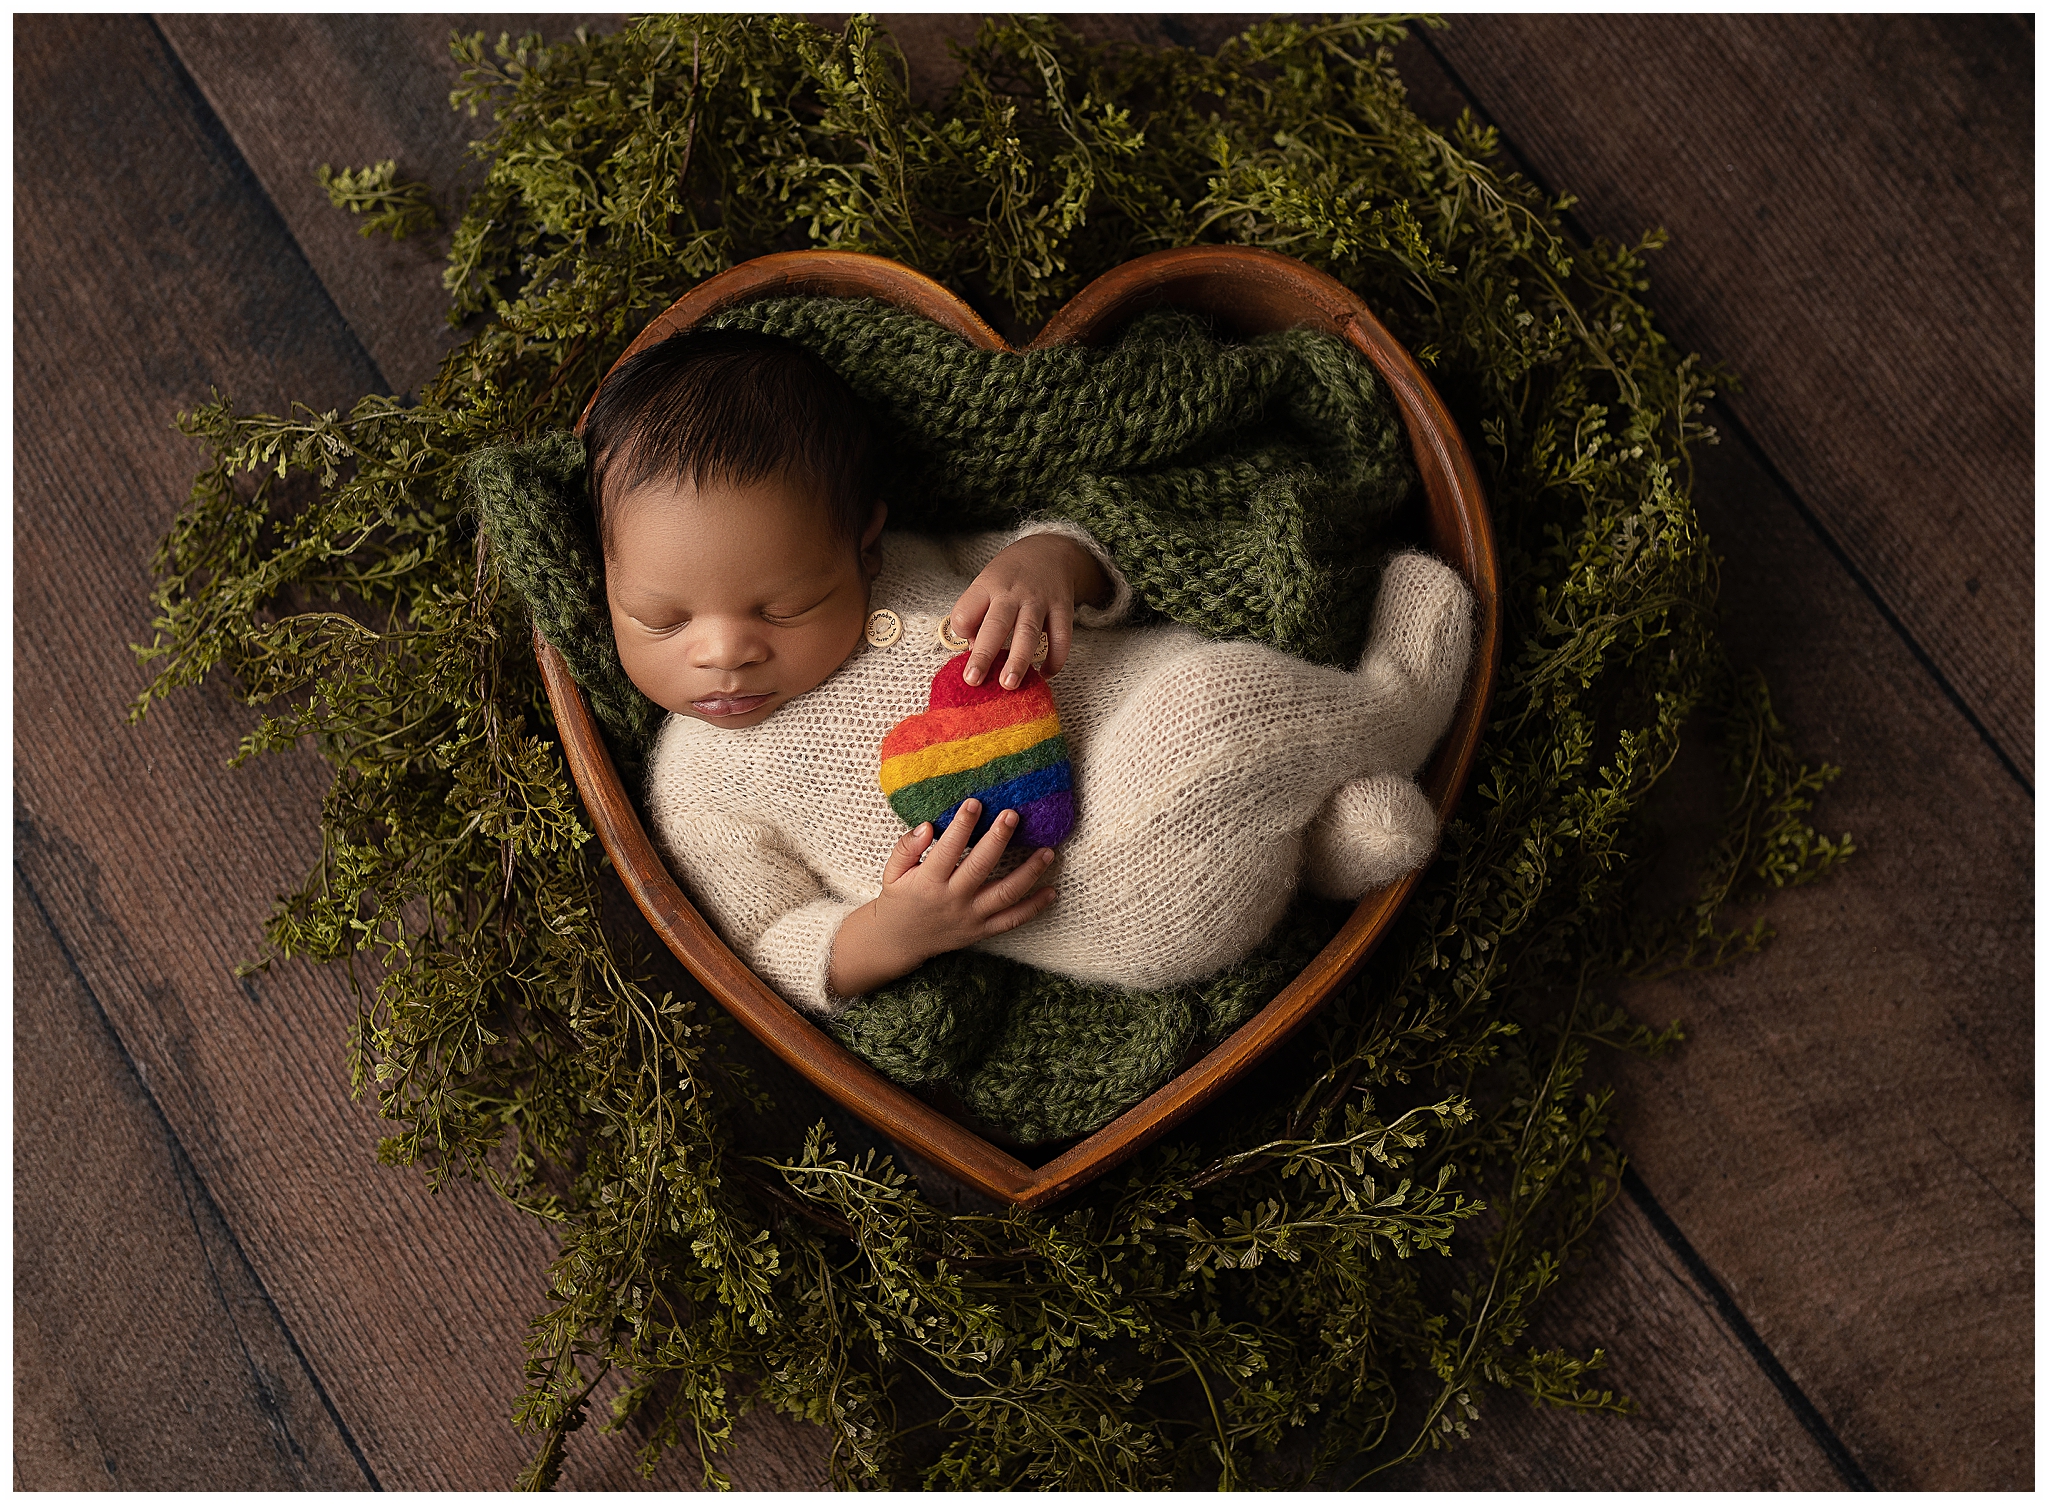 baby sleeping in a brown heart bowl surrounded by greenery